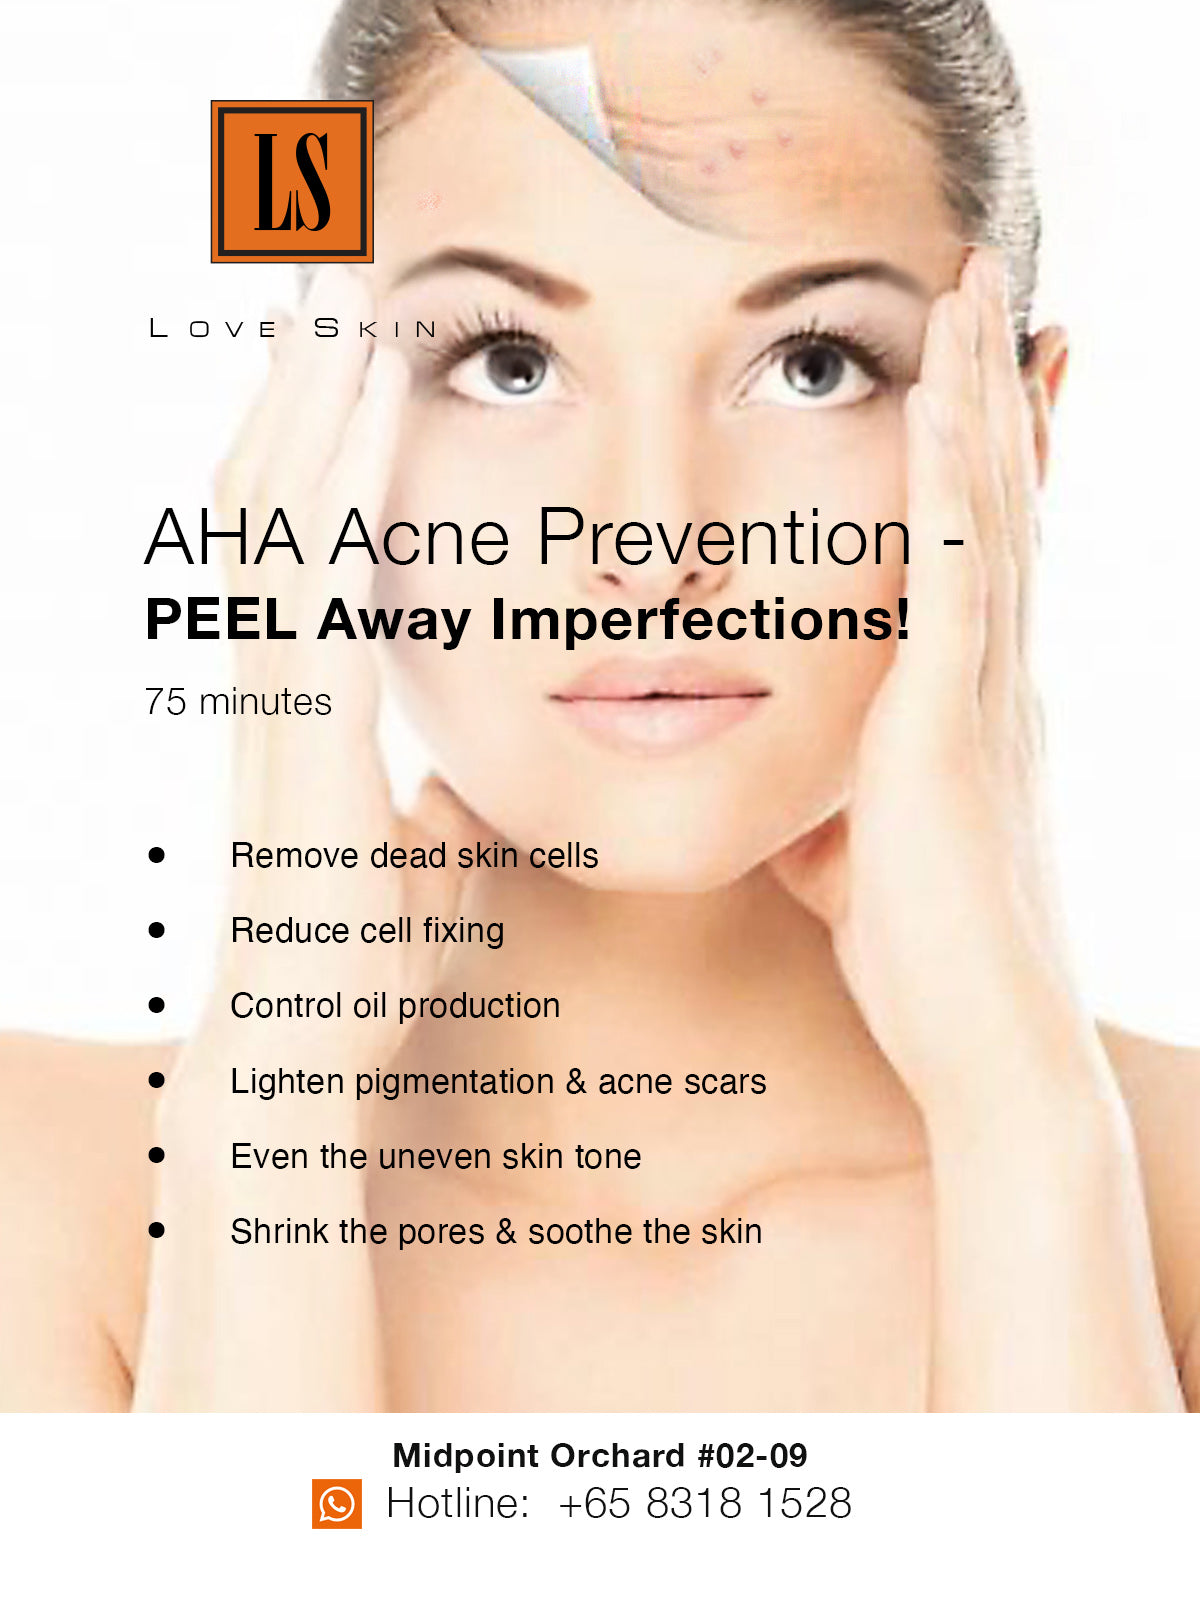 [S190009-75] AHA Acne Prevention Facial Treatment - PEEL Away Imperfections!